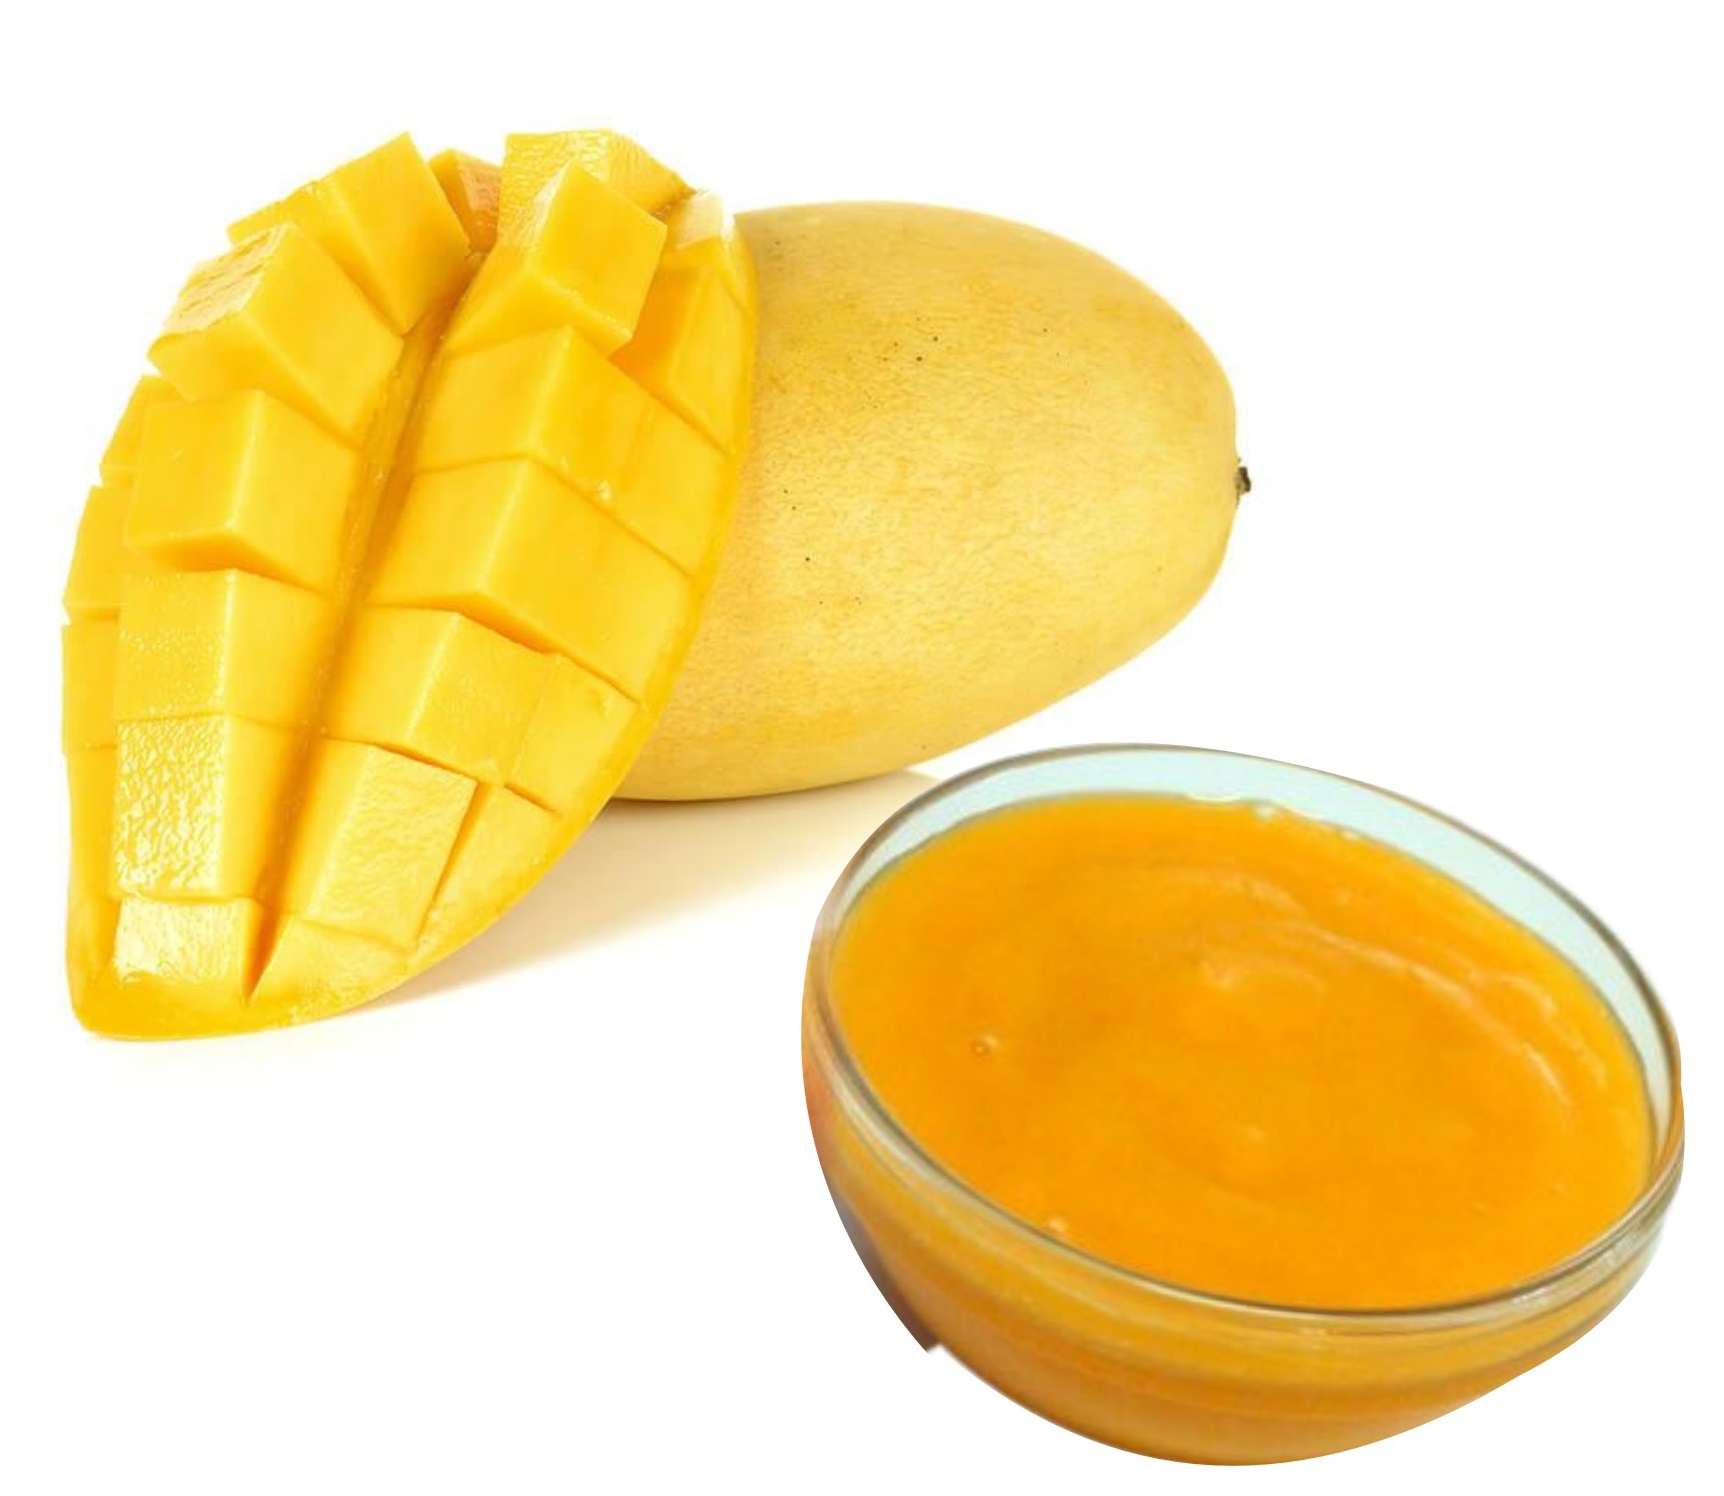 Best Indian Canned Mango Pulp Alphonso Mango Pulp with good puree and best price from India